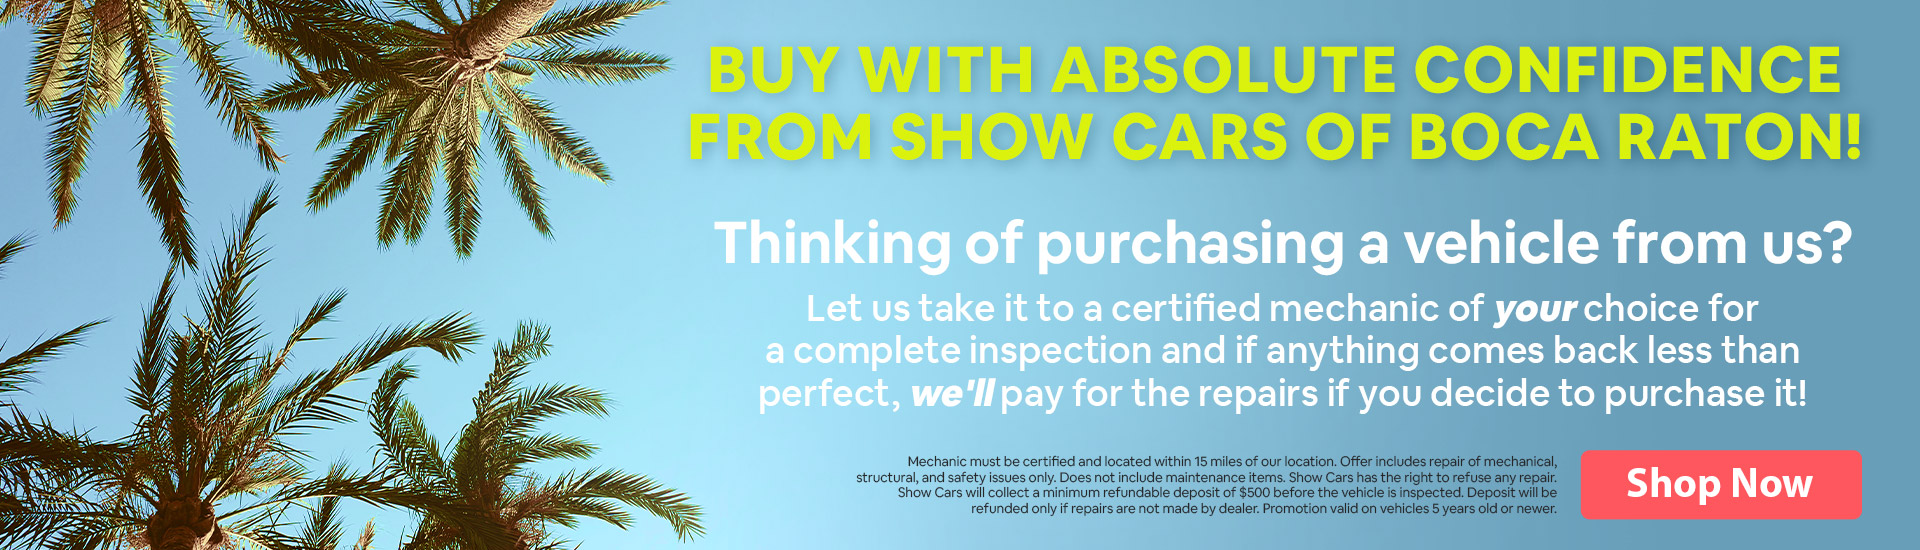 Buy With Absolute Confidence From Show Cars Of Boca Raton | Boca Raton, FL